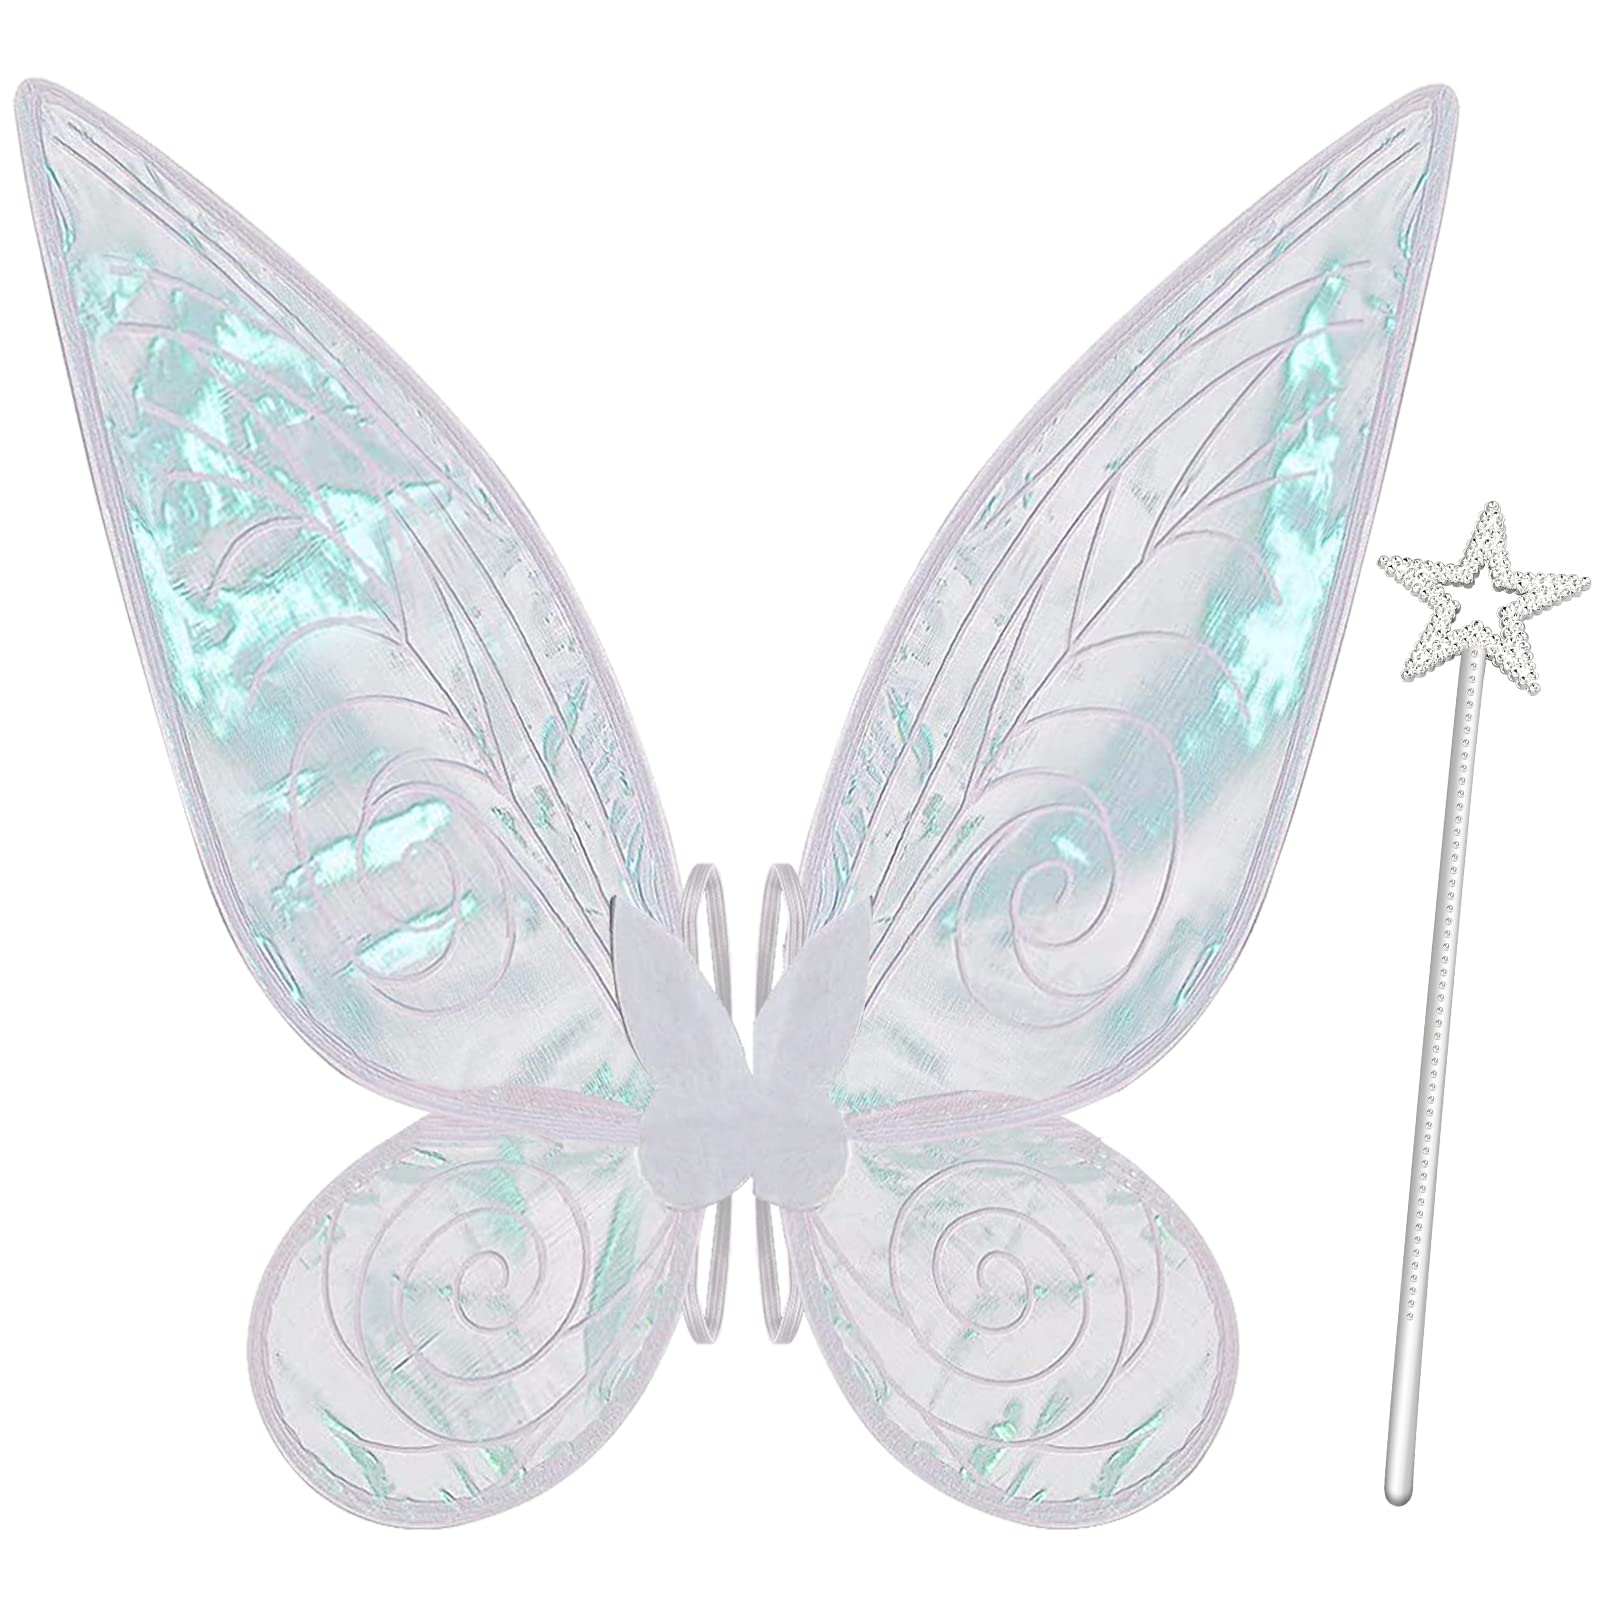 quescu Fairy Wings for Adults,Butterfly Wings for Girls,Angel Wings,Fairy Costume for Women Halloween Dress Up Party Favor